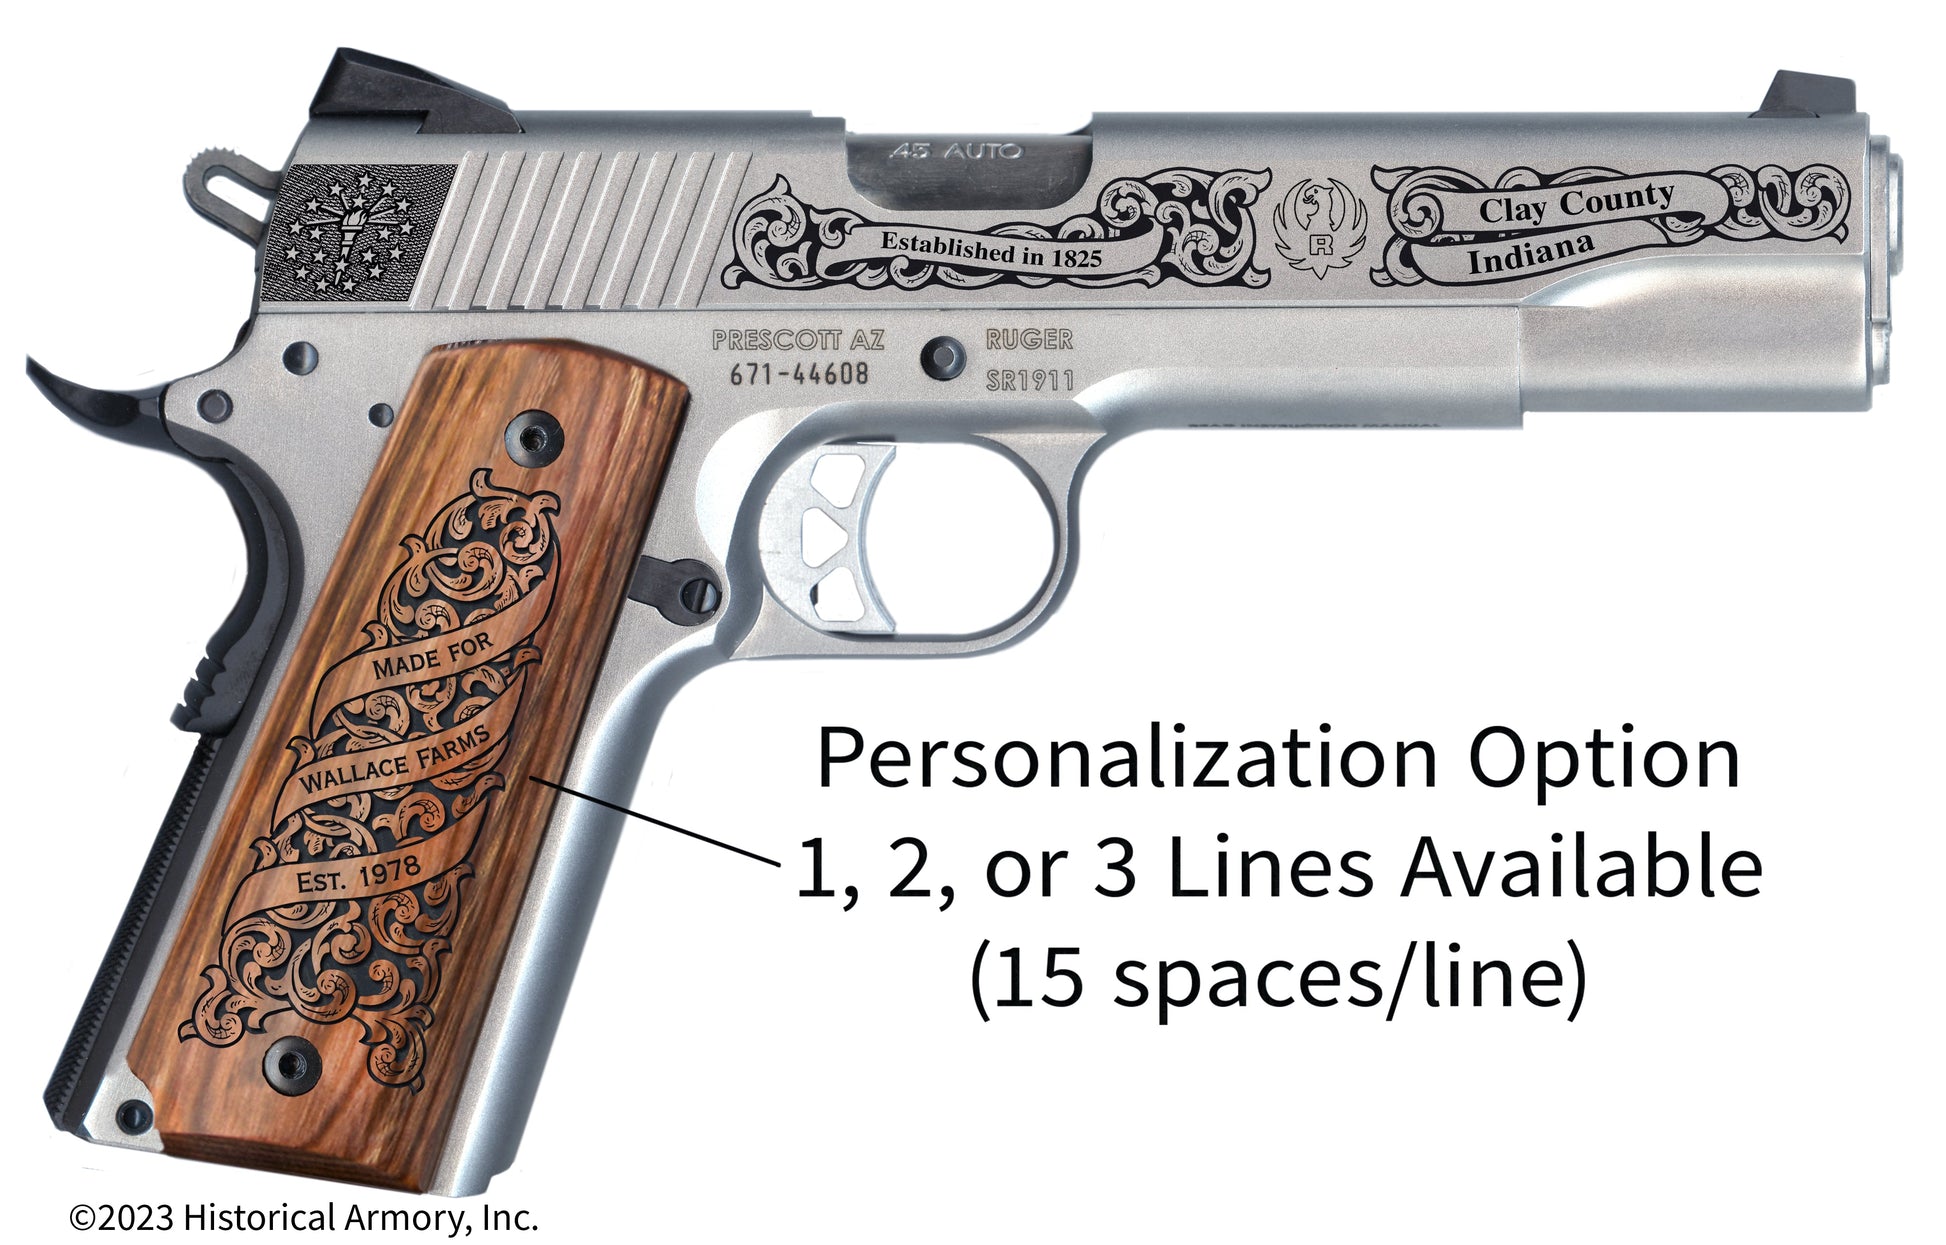 Clay County Indiana Personalized Engraved .45 Auto Ruger 1911